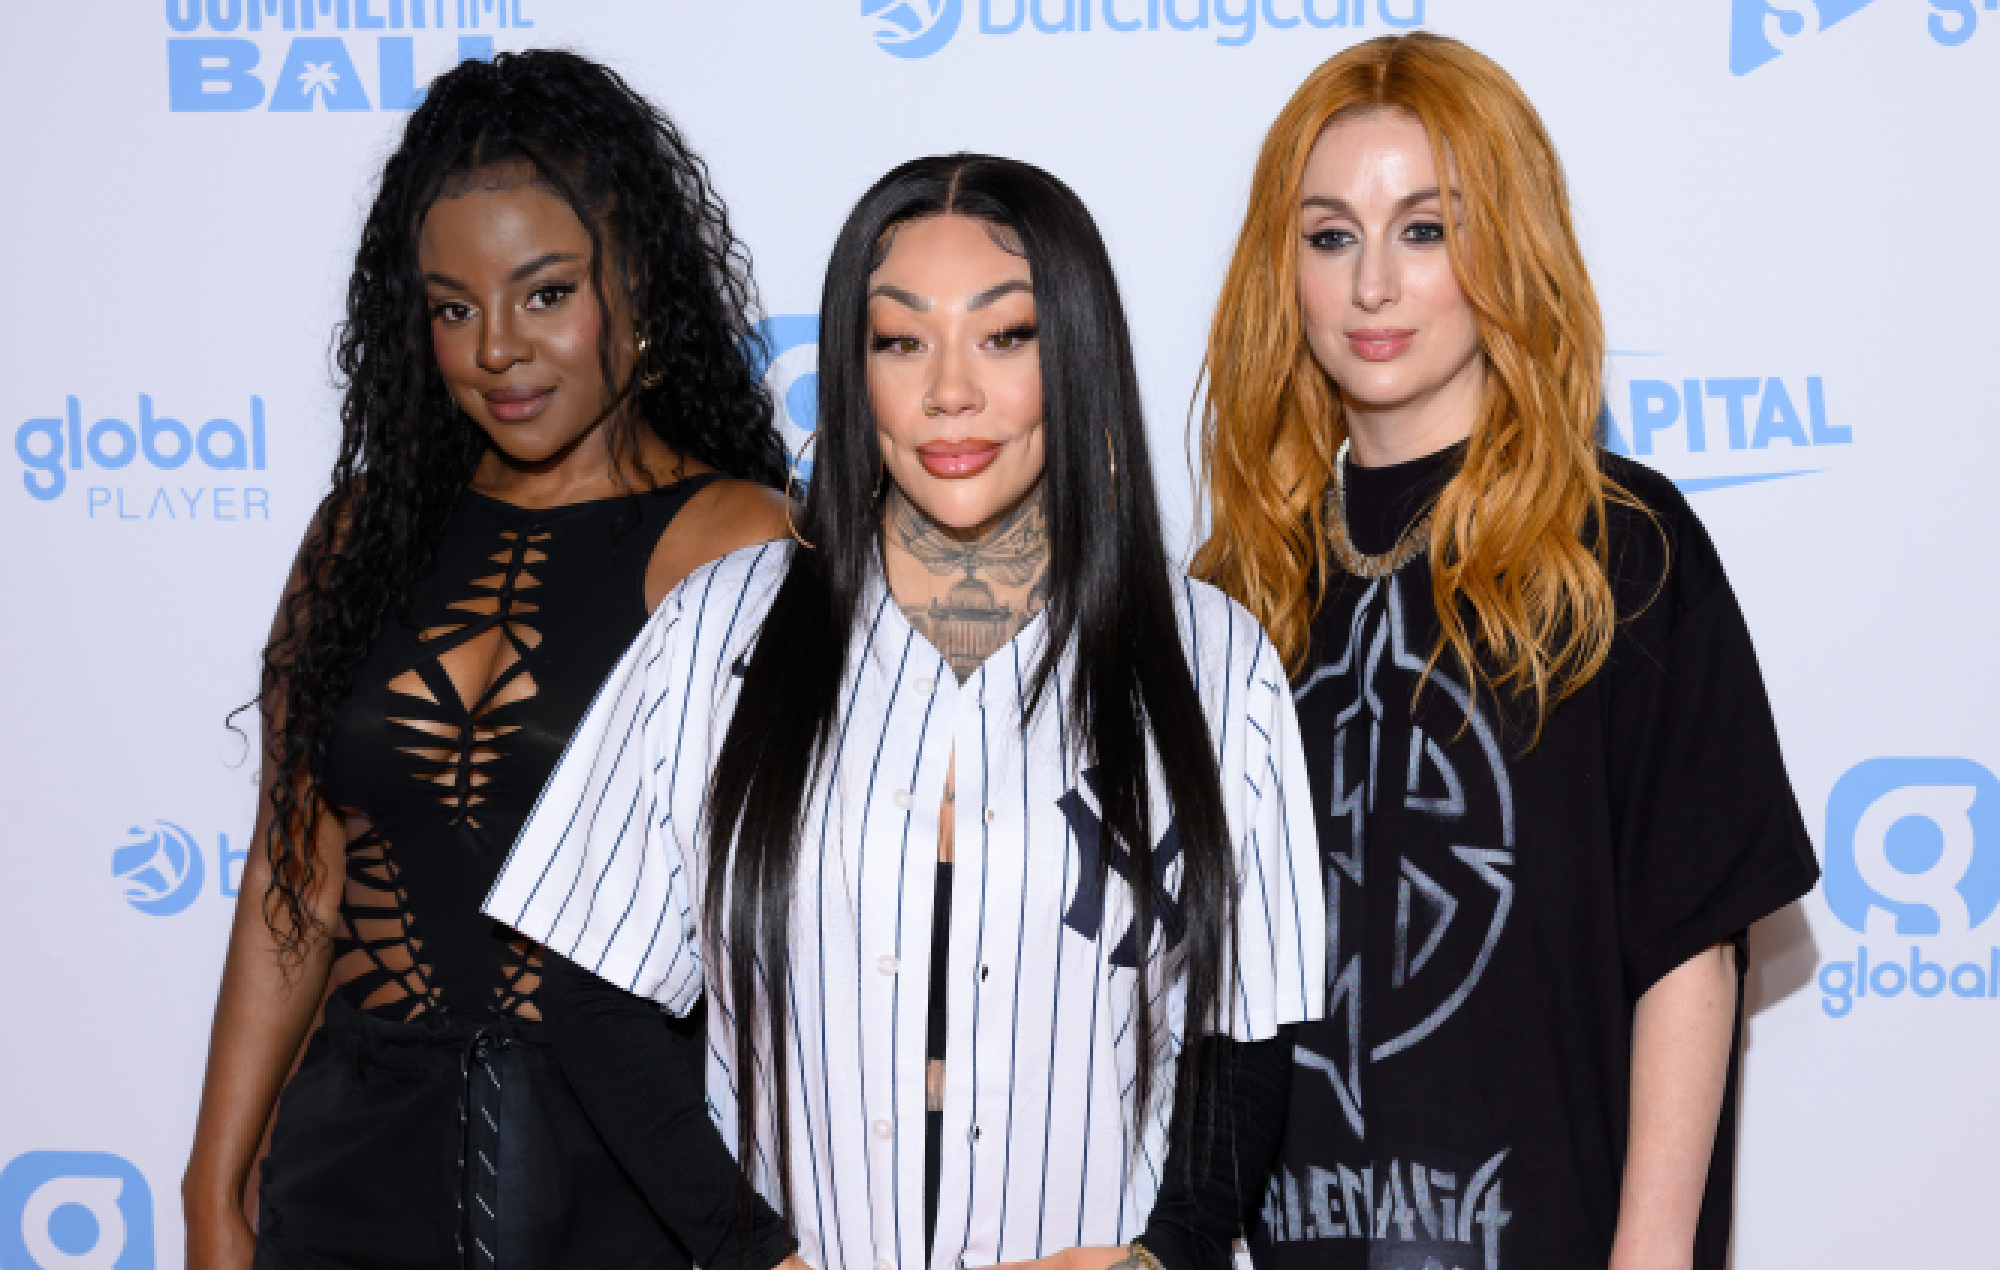 Sugababes at Glastonbury: “We were one of the first, if not the first, female pop band to play the main stage”